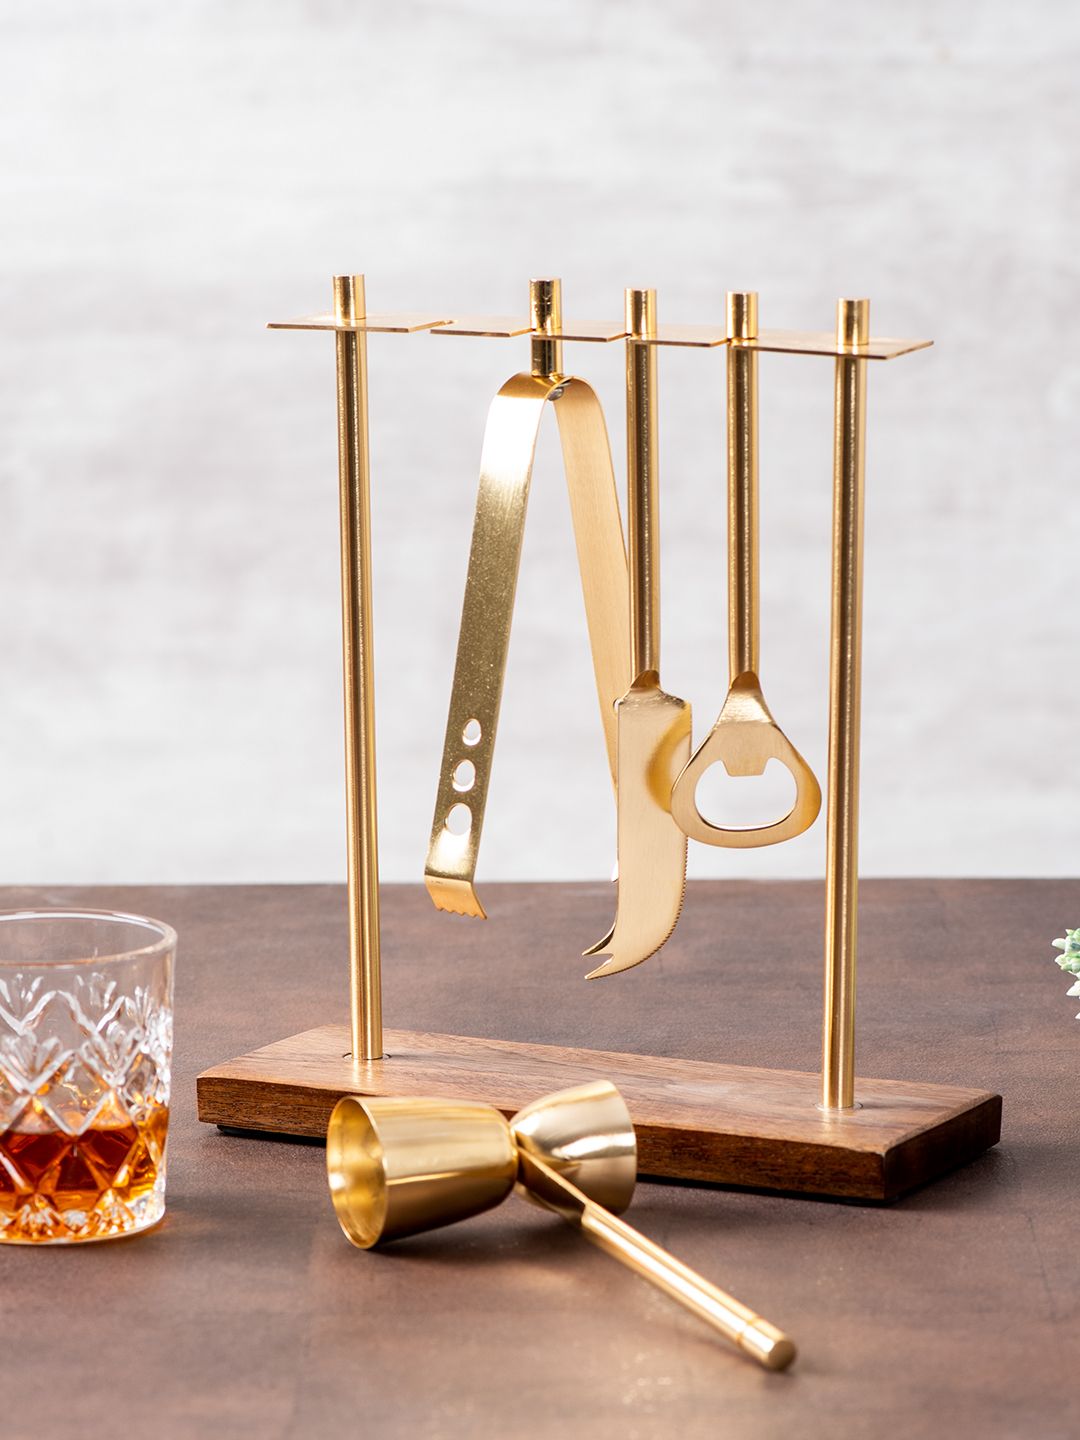 nestroots Brown & Gold-Toned Stainless Steel Bar Tool Set With Wooden Stand Price in India